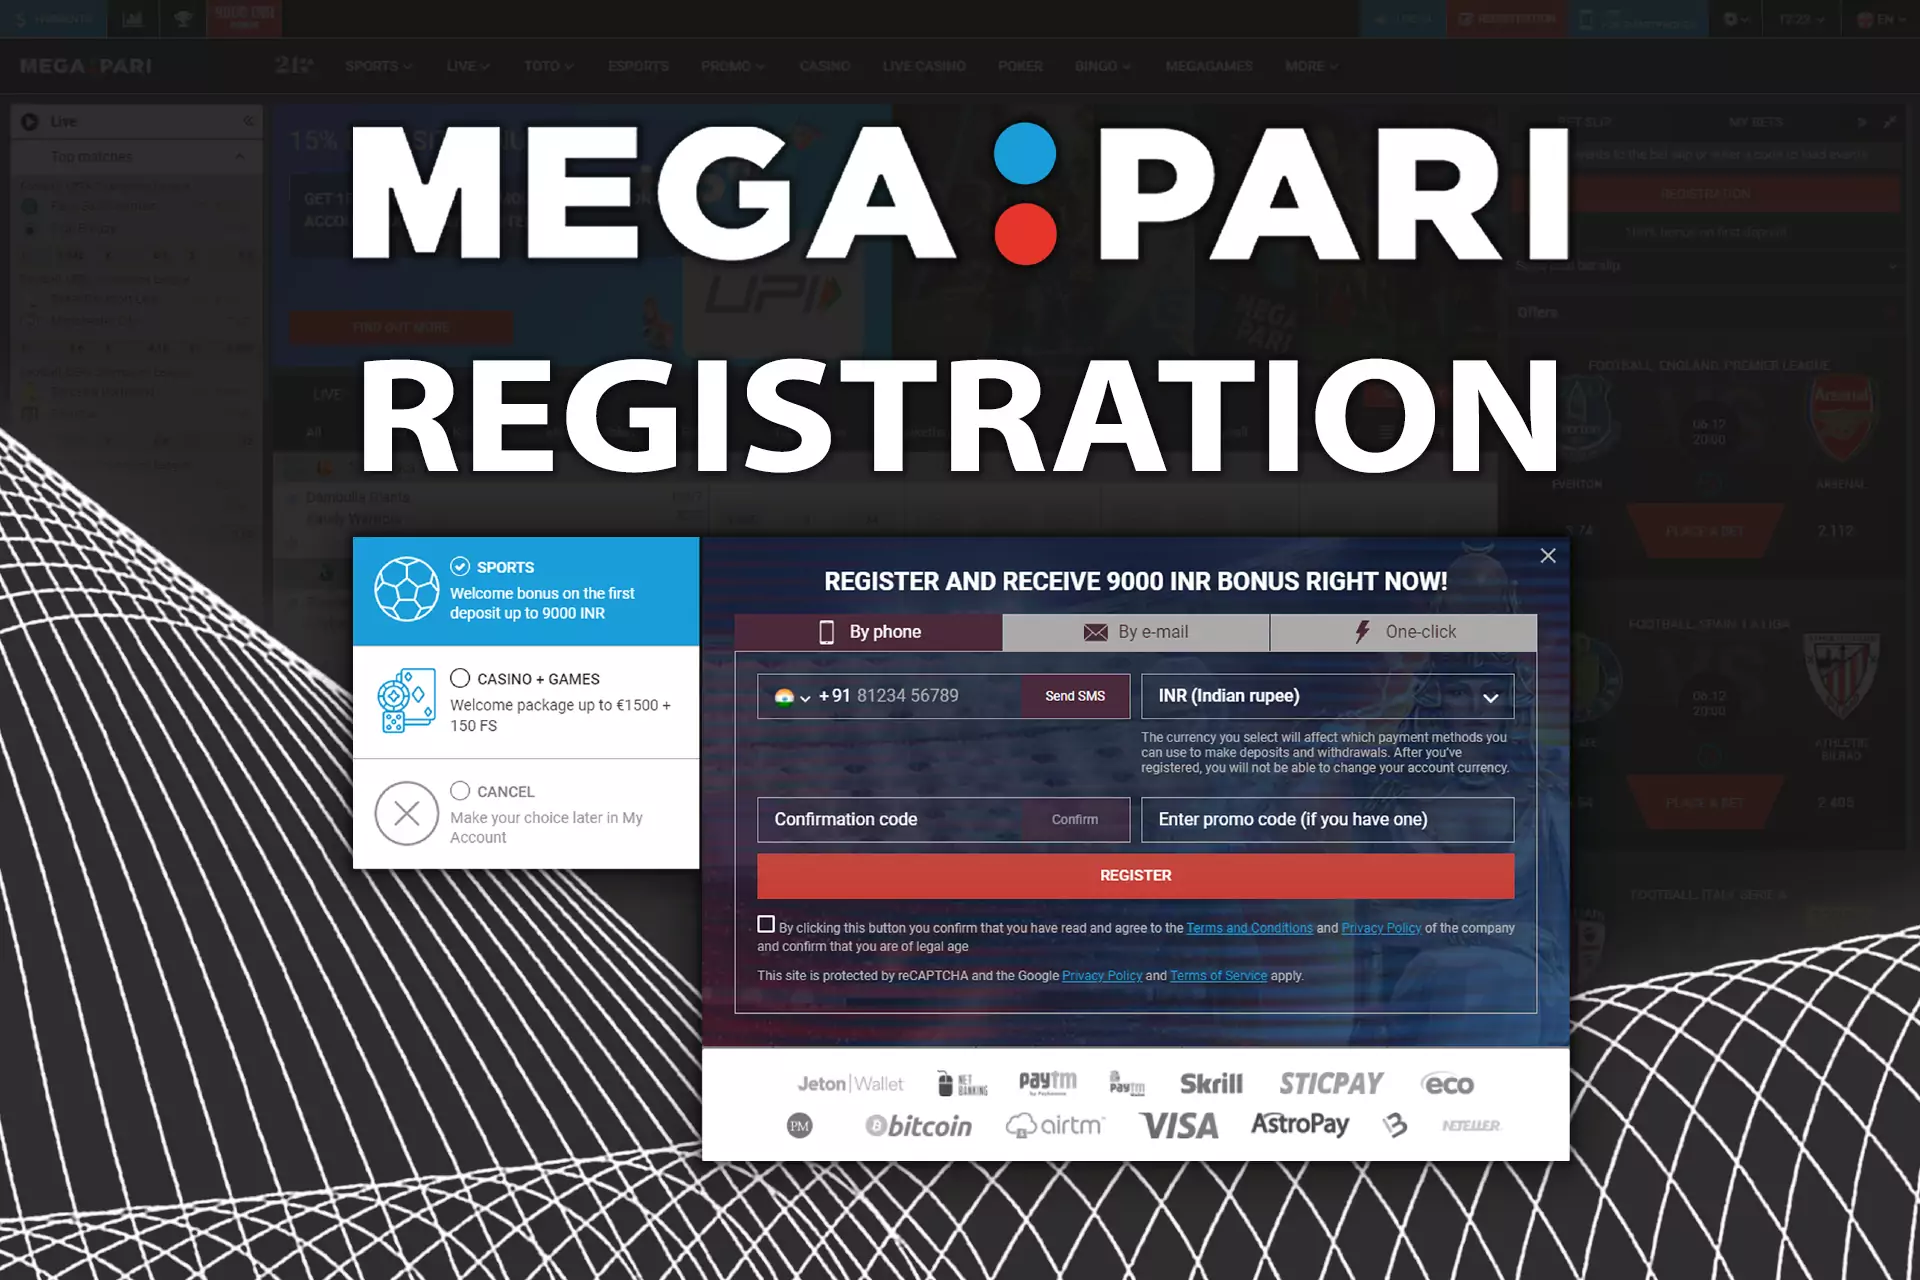 To bet at the MegaPari site, you need to create an account or log in.